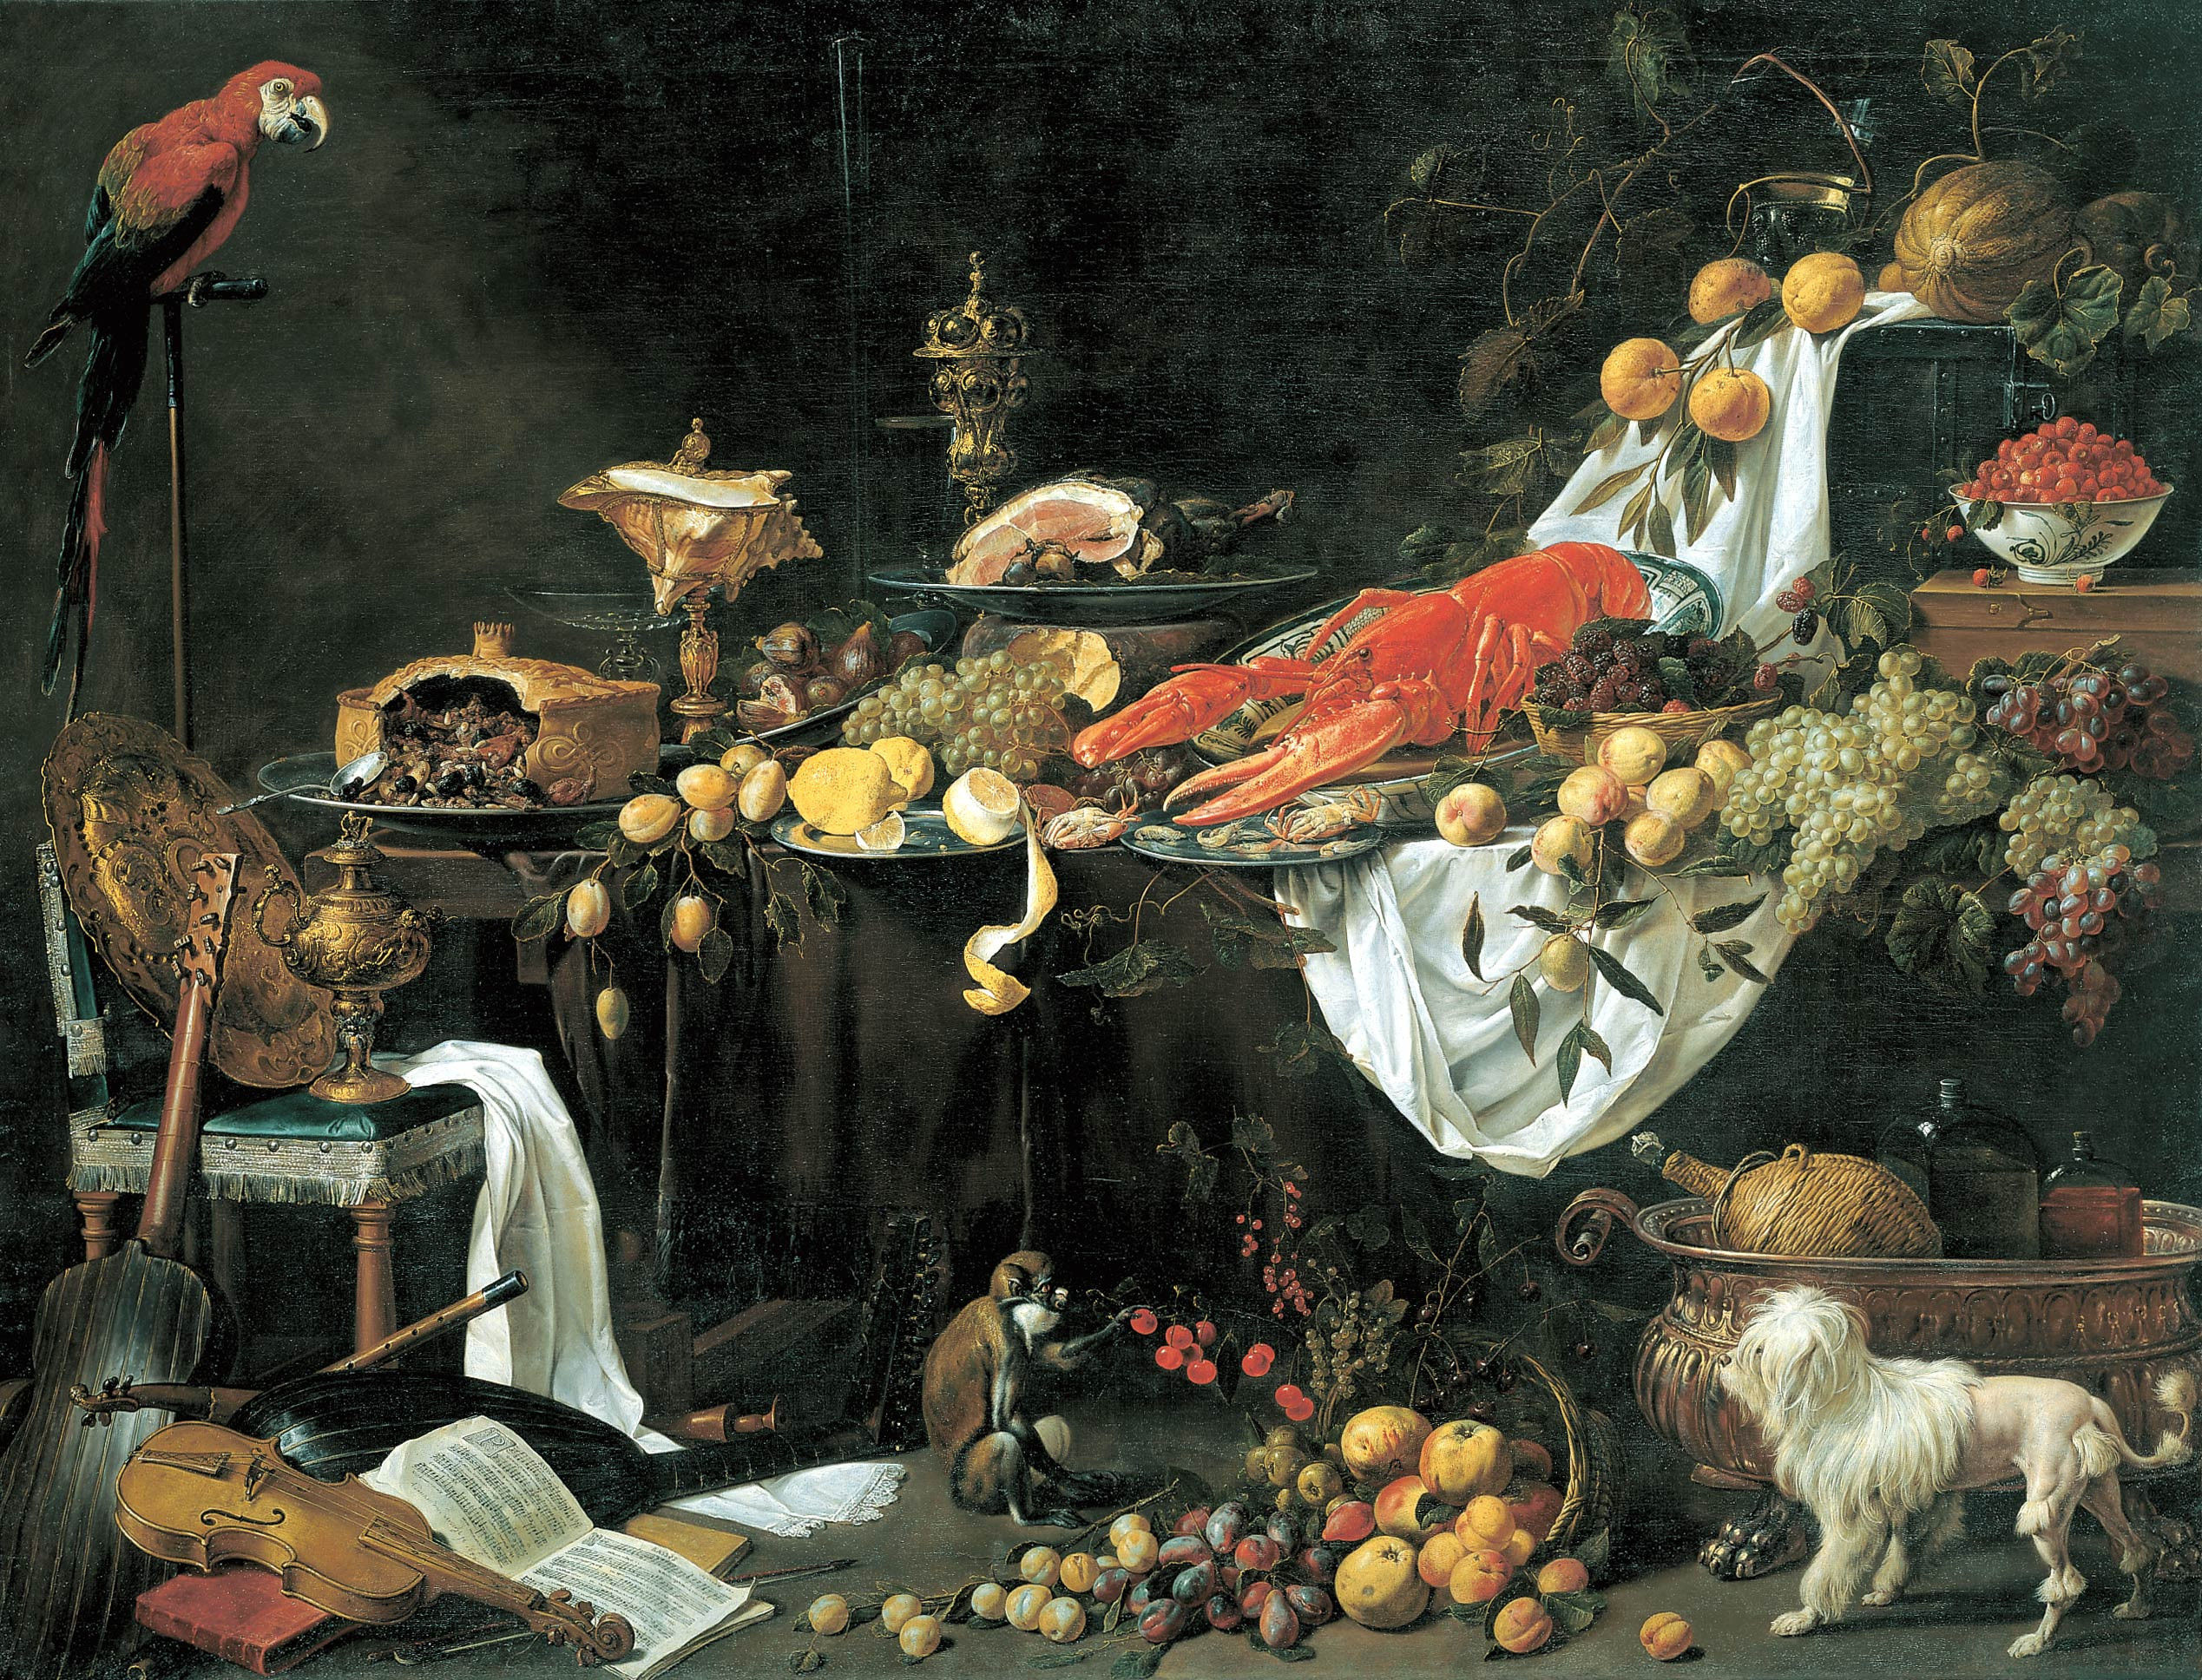 'Banquet Still Life', painted by the Flemish Adriaen van Utrecht in 1644 shows the expertise of the painter, the painting was probably intended for above the mantelpiece because of the low perspective